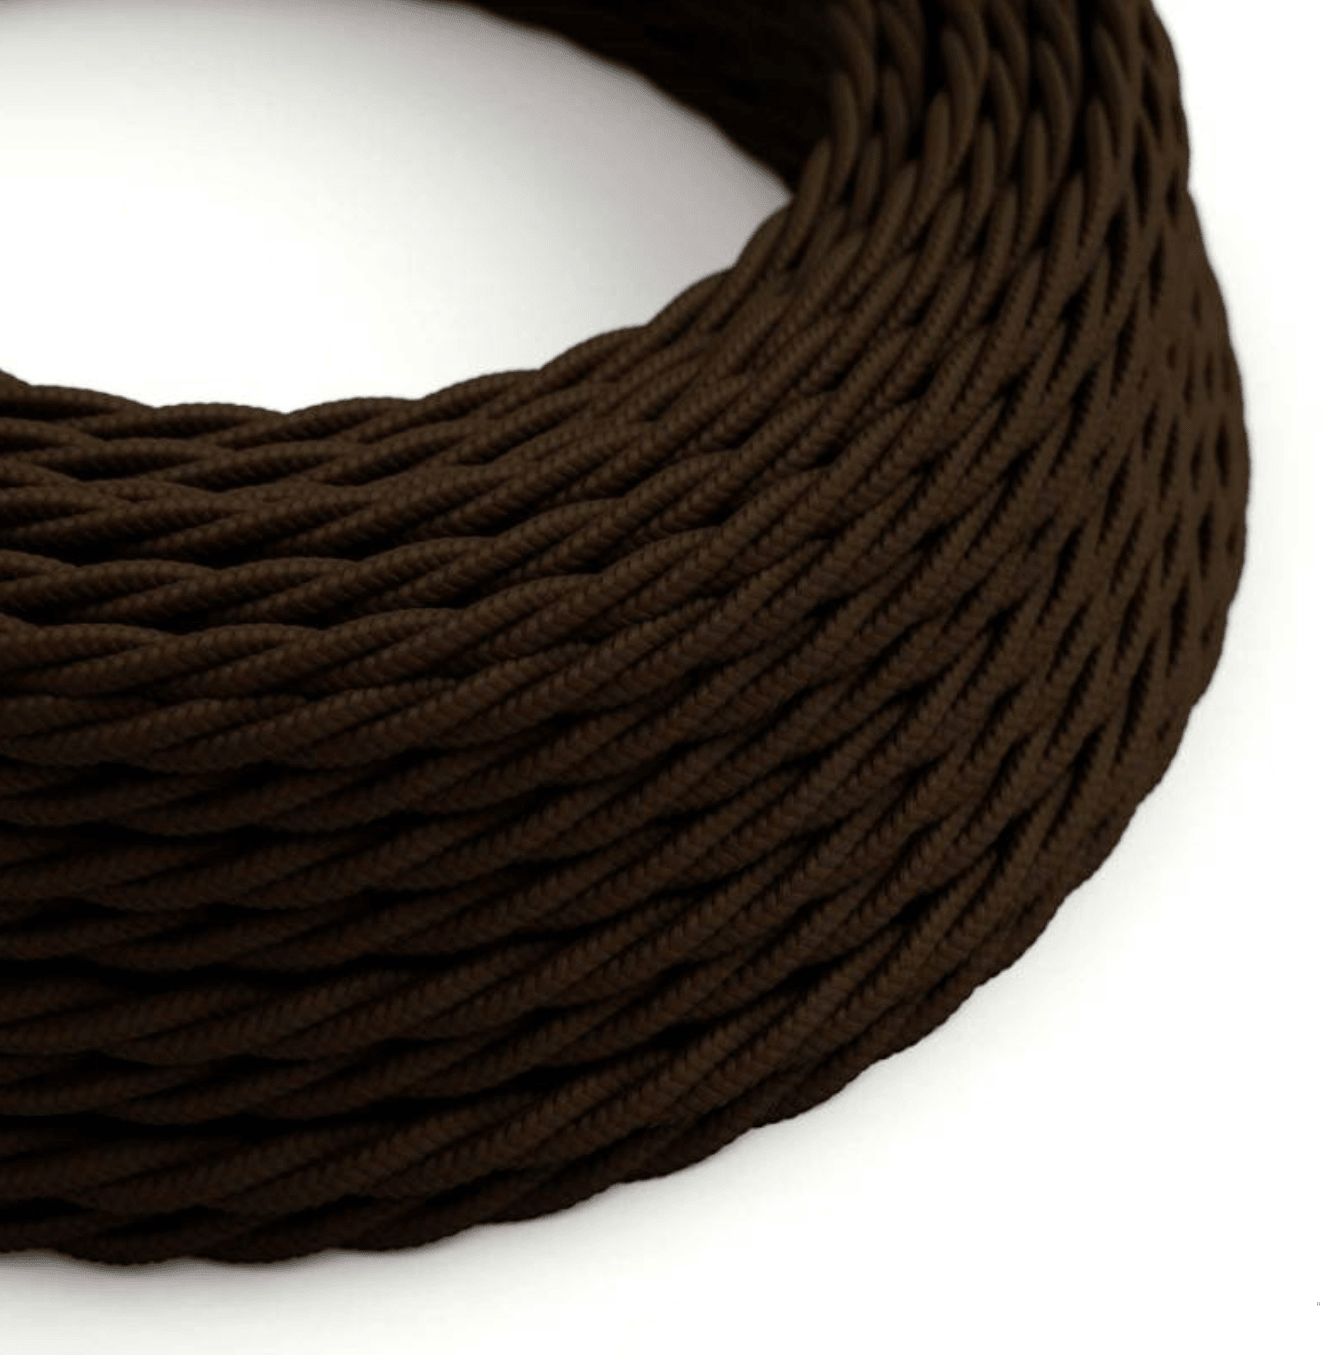 Twisted Electric Cable covered by Rayon solid color fabric TM13 Brown - MooBoo Home